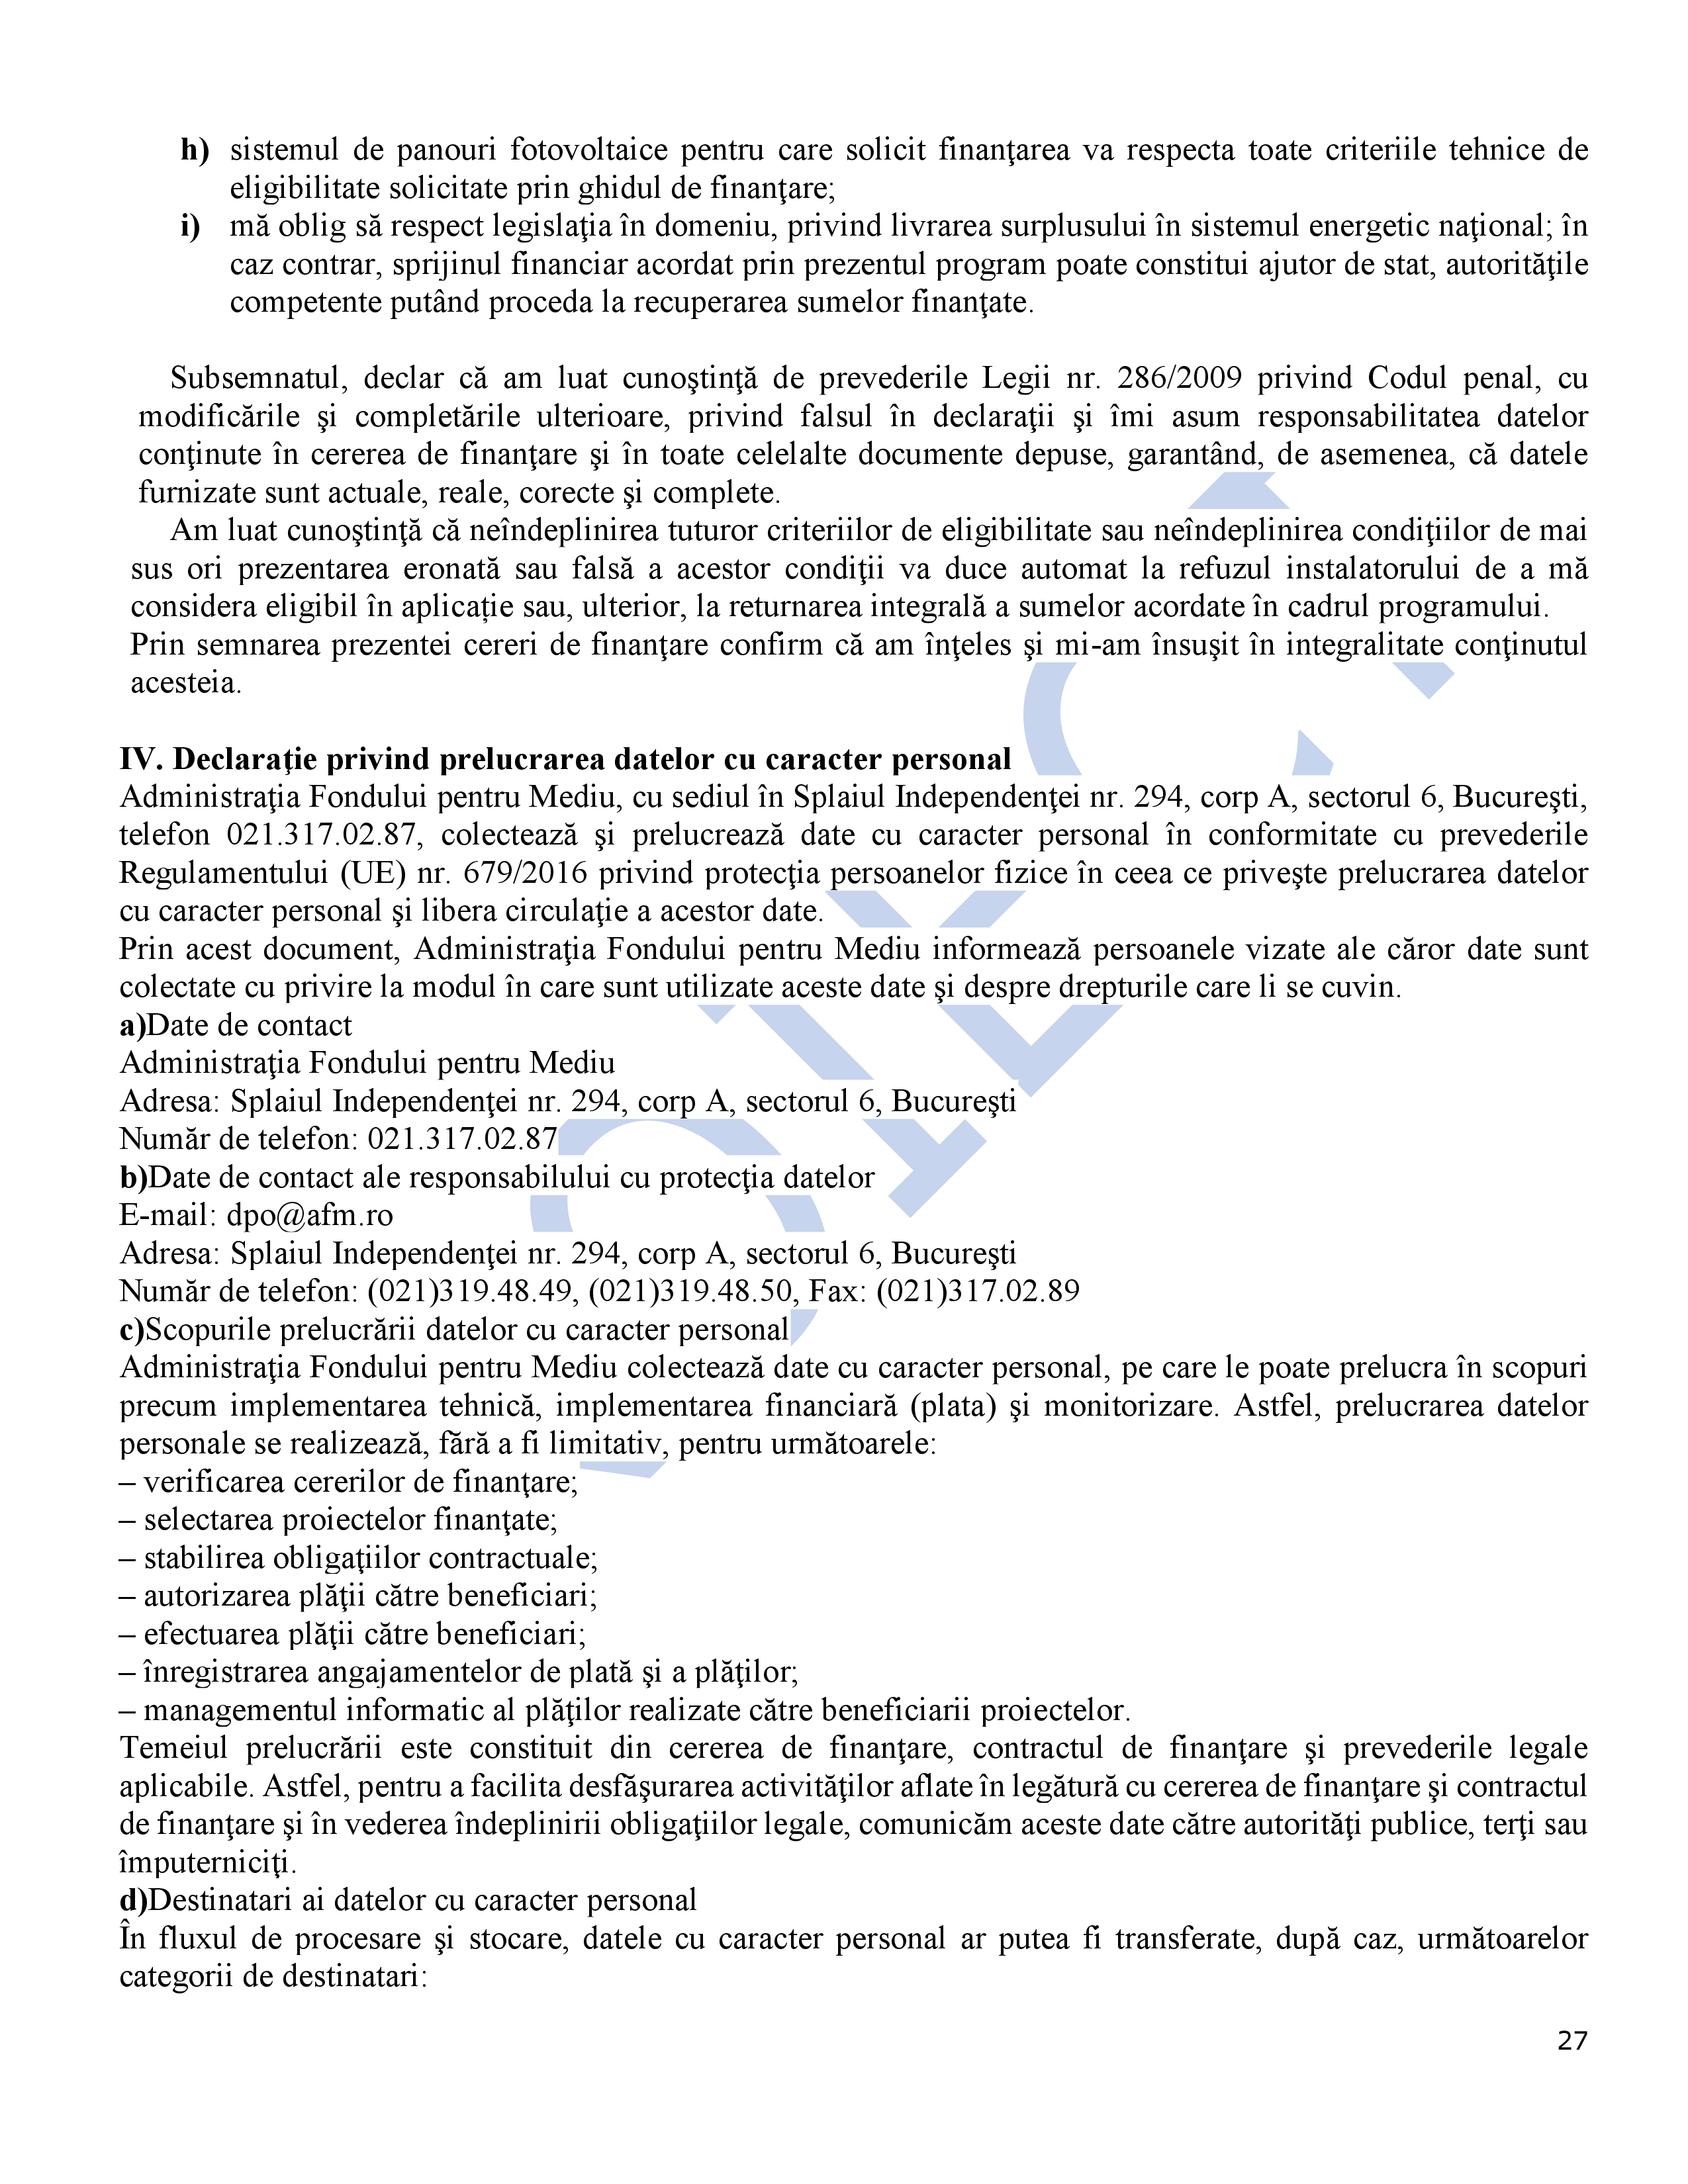 Pagina 27 - ghid_fotovoltaice_2023 